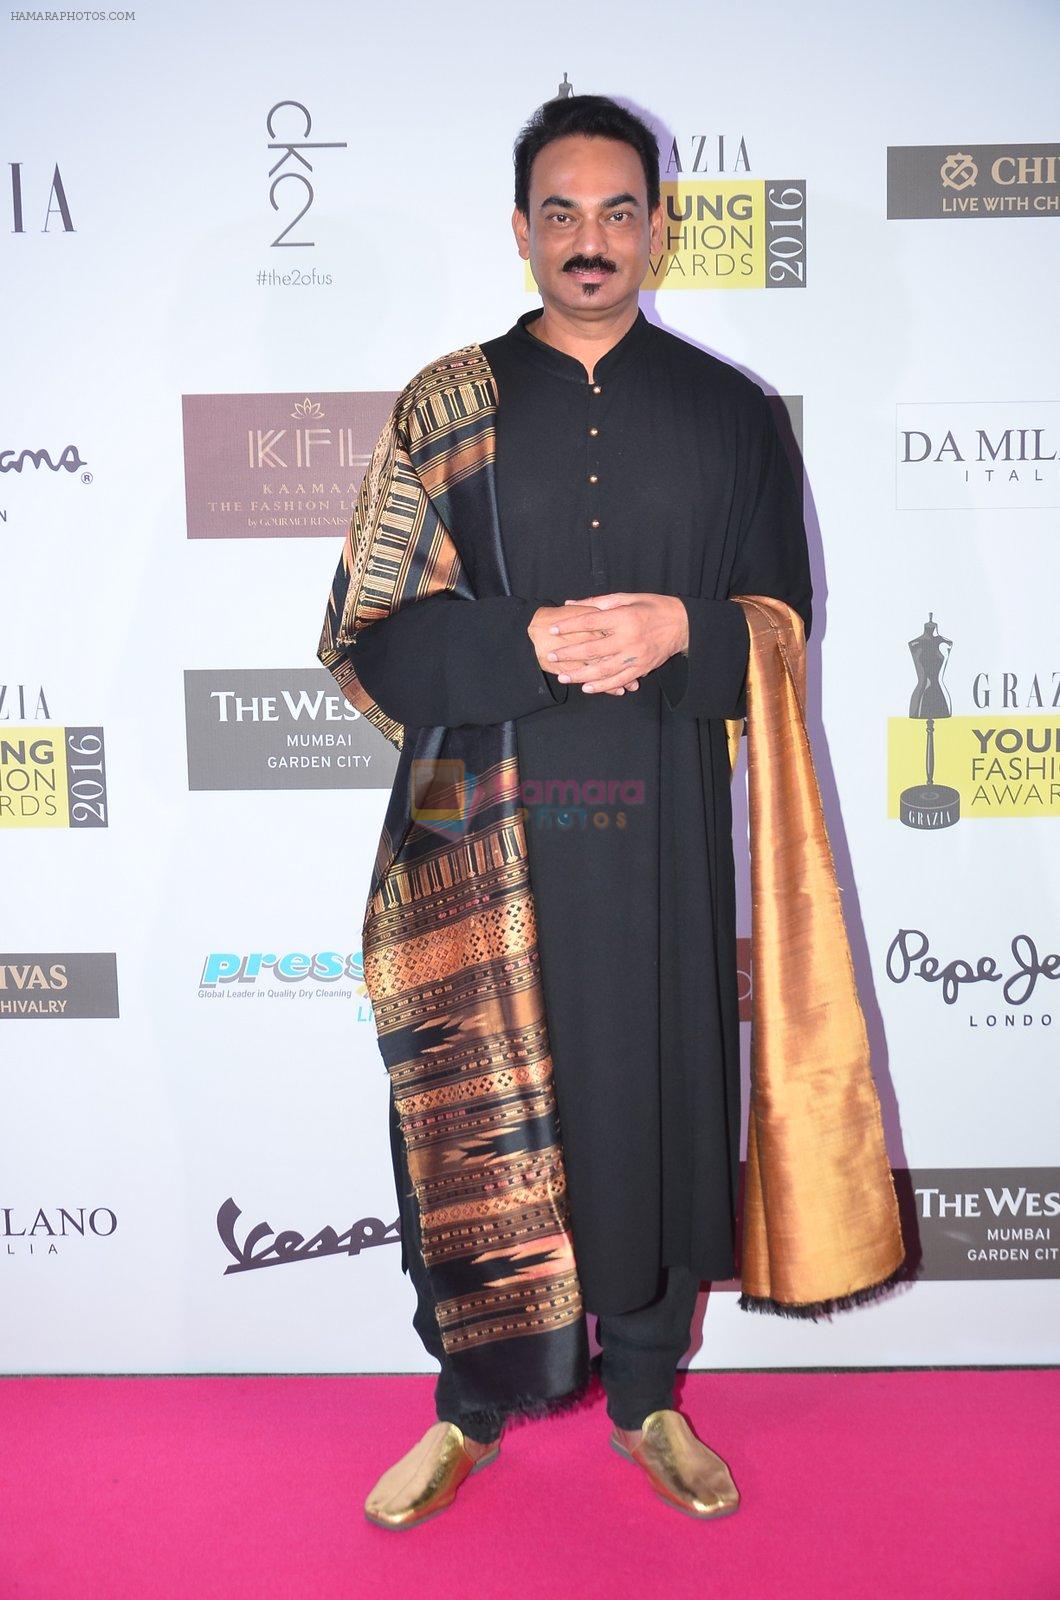 Wendell Rodericks at Grazia Young Fashion Awards 2016 Red Carpet on 7th April 2016